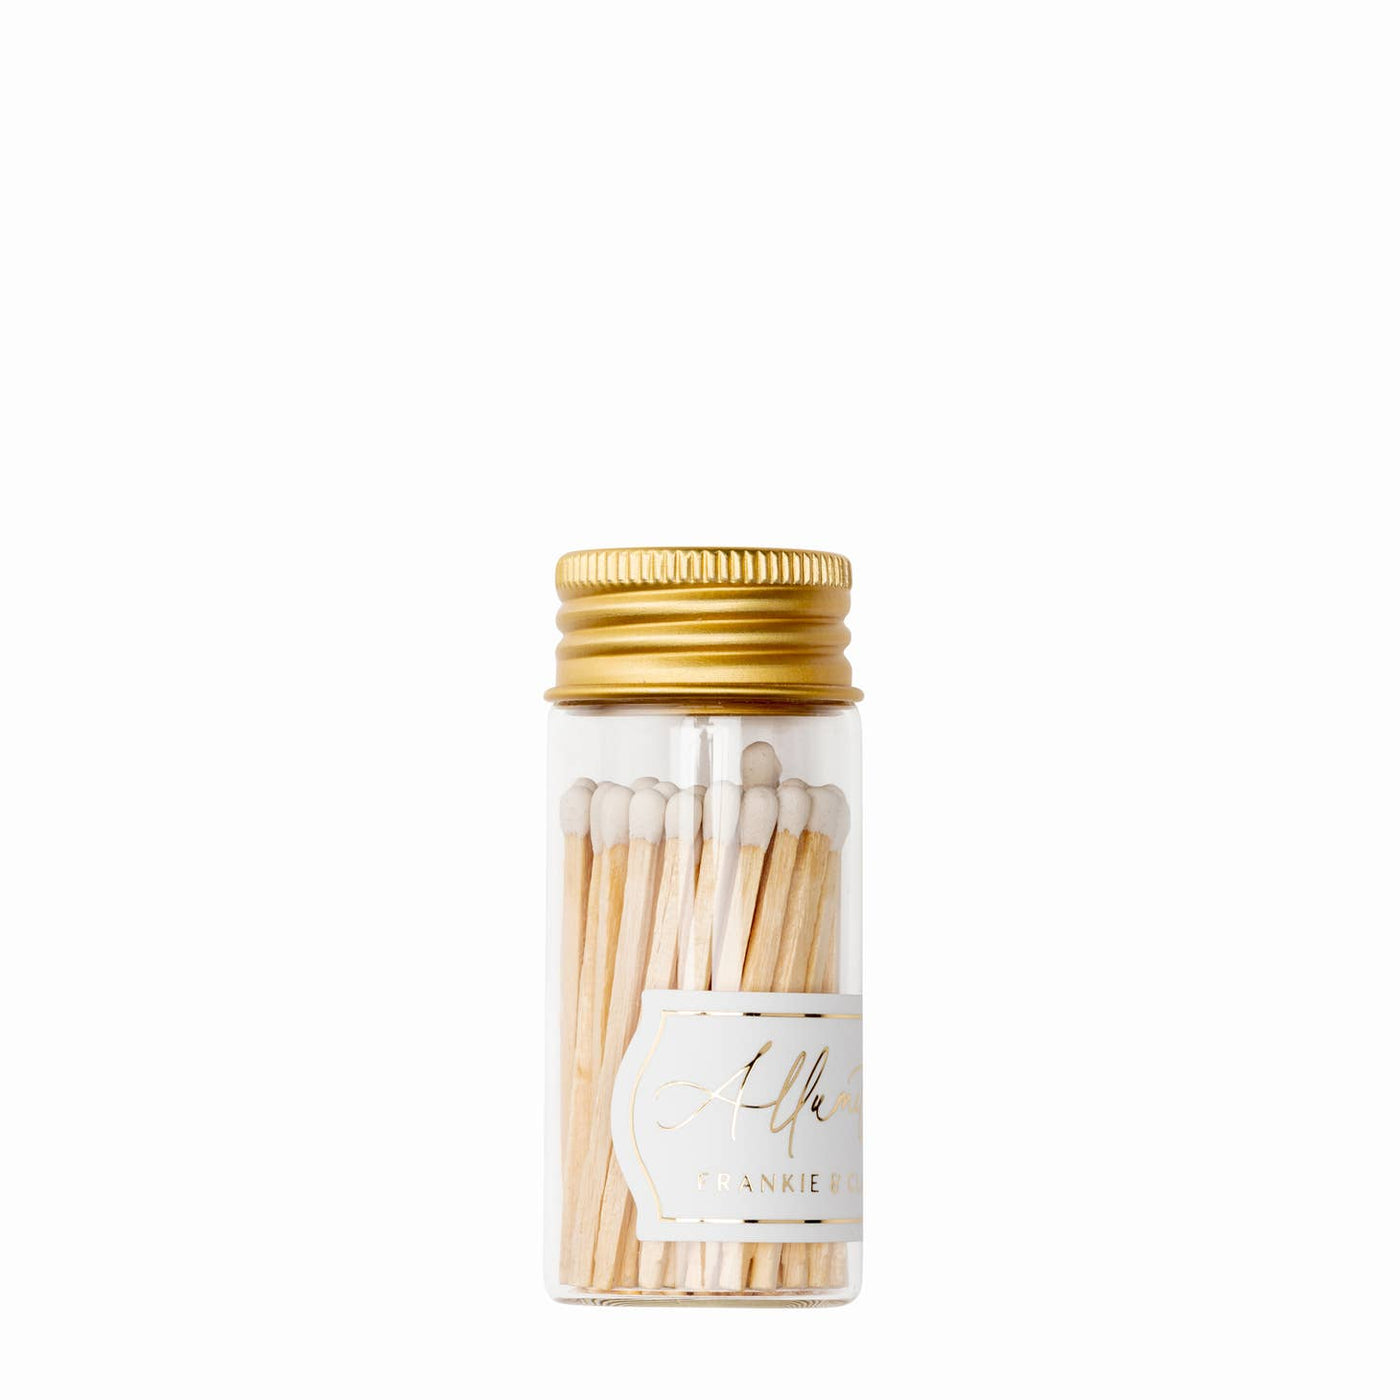 Glass Allumette Match Jar: White Matches By Frankie and Claude